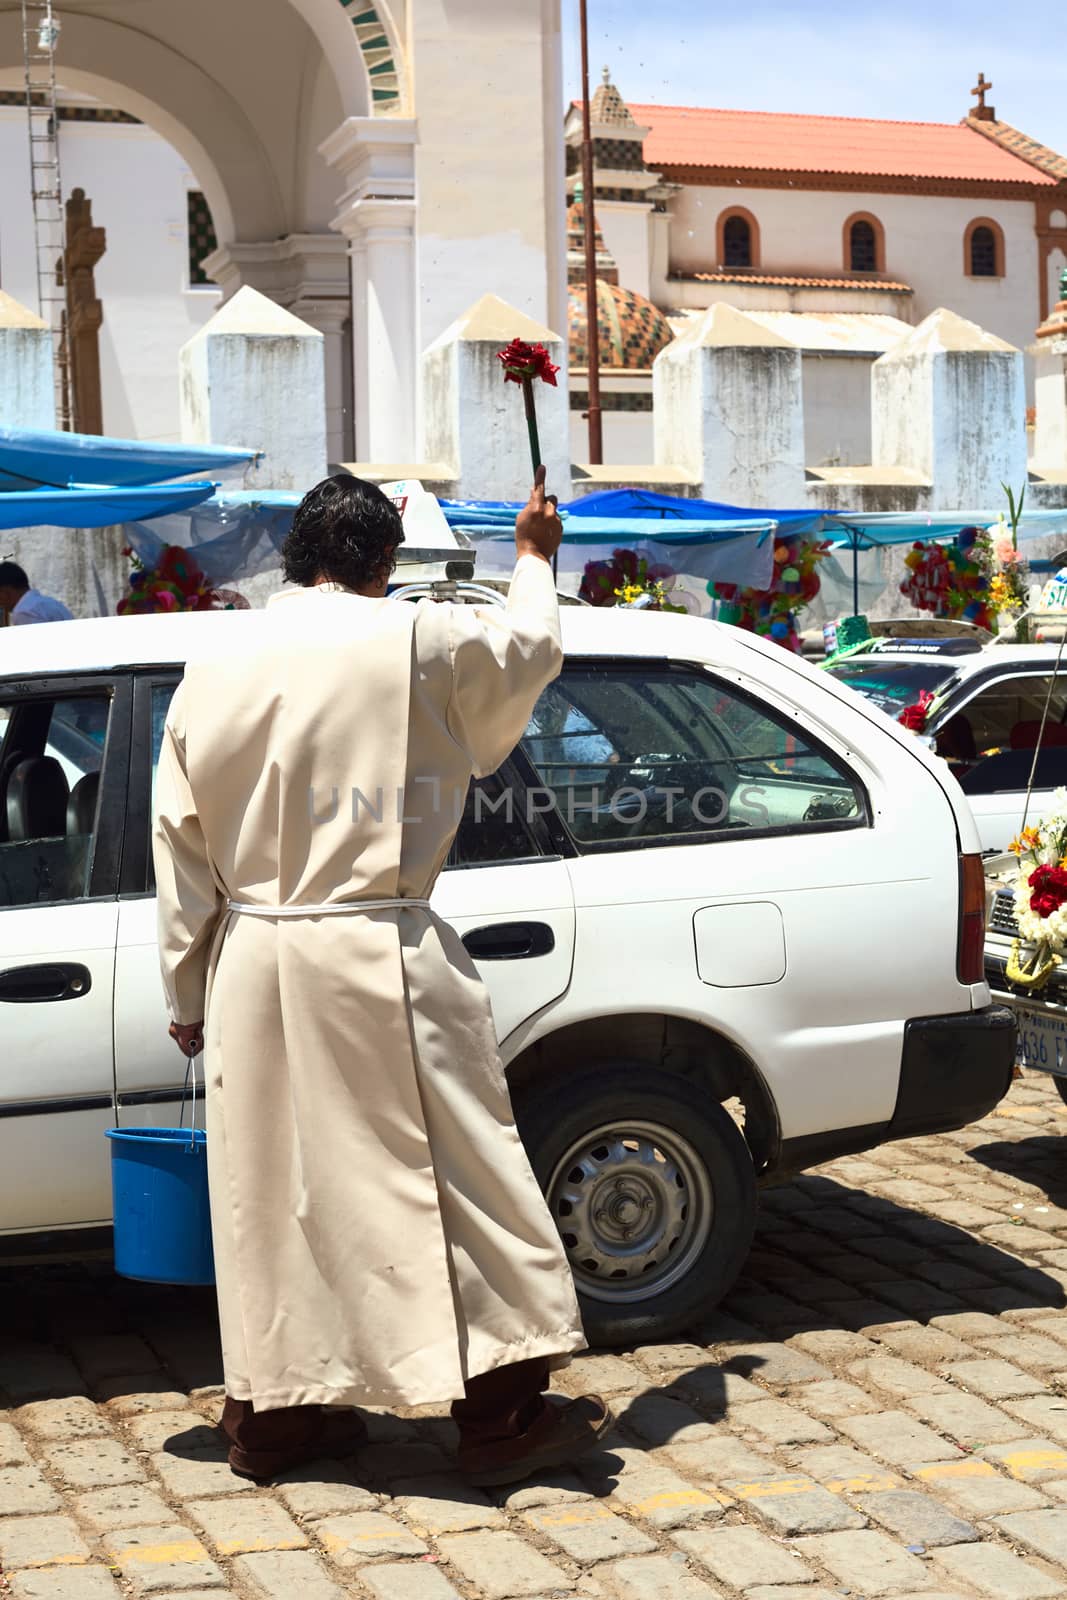 COPACABANA, BOLIVIA - OCTOBER 20, 2014: Unidentified priest sprinkling holy water on a car at the blessing of automobiles in front of the basilica on 6 de Agosto avenue in the center of the small tourist town on October 20, 2014 in Copacabana, Bolivia. Almost every day many cars, taxis, buses and vans are standing in line to receive blessing from a priest of the basilica.